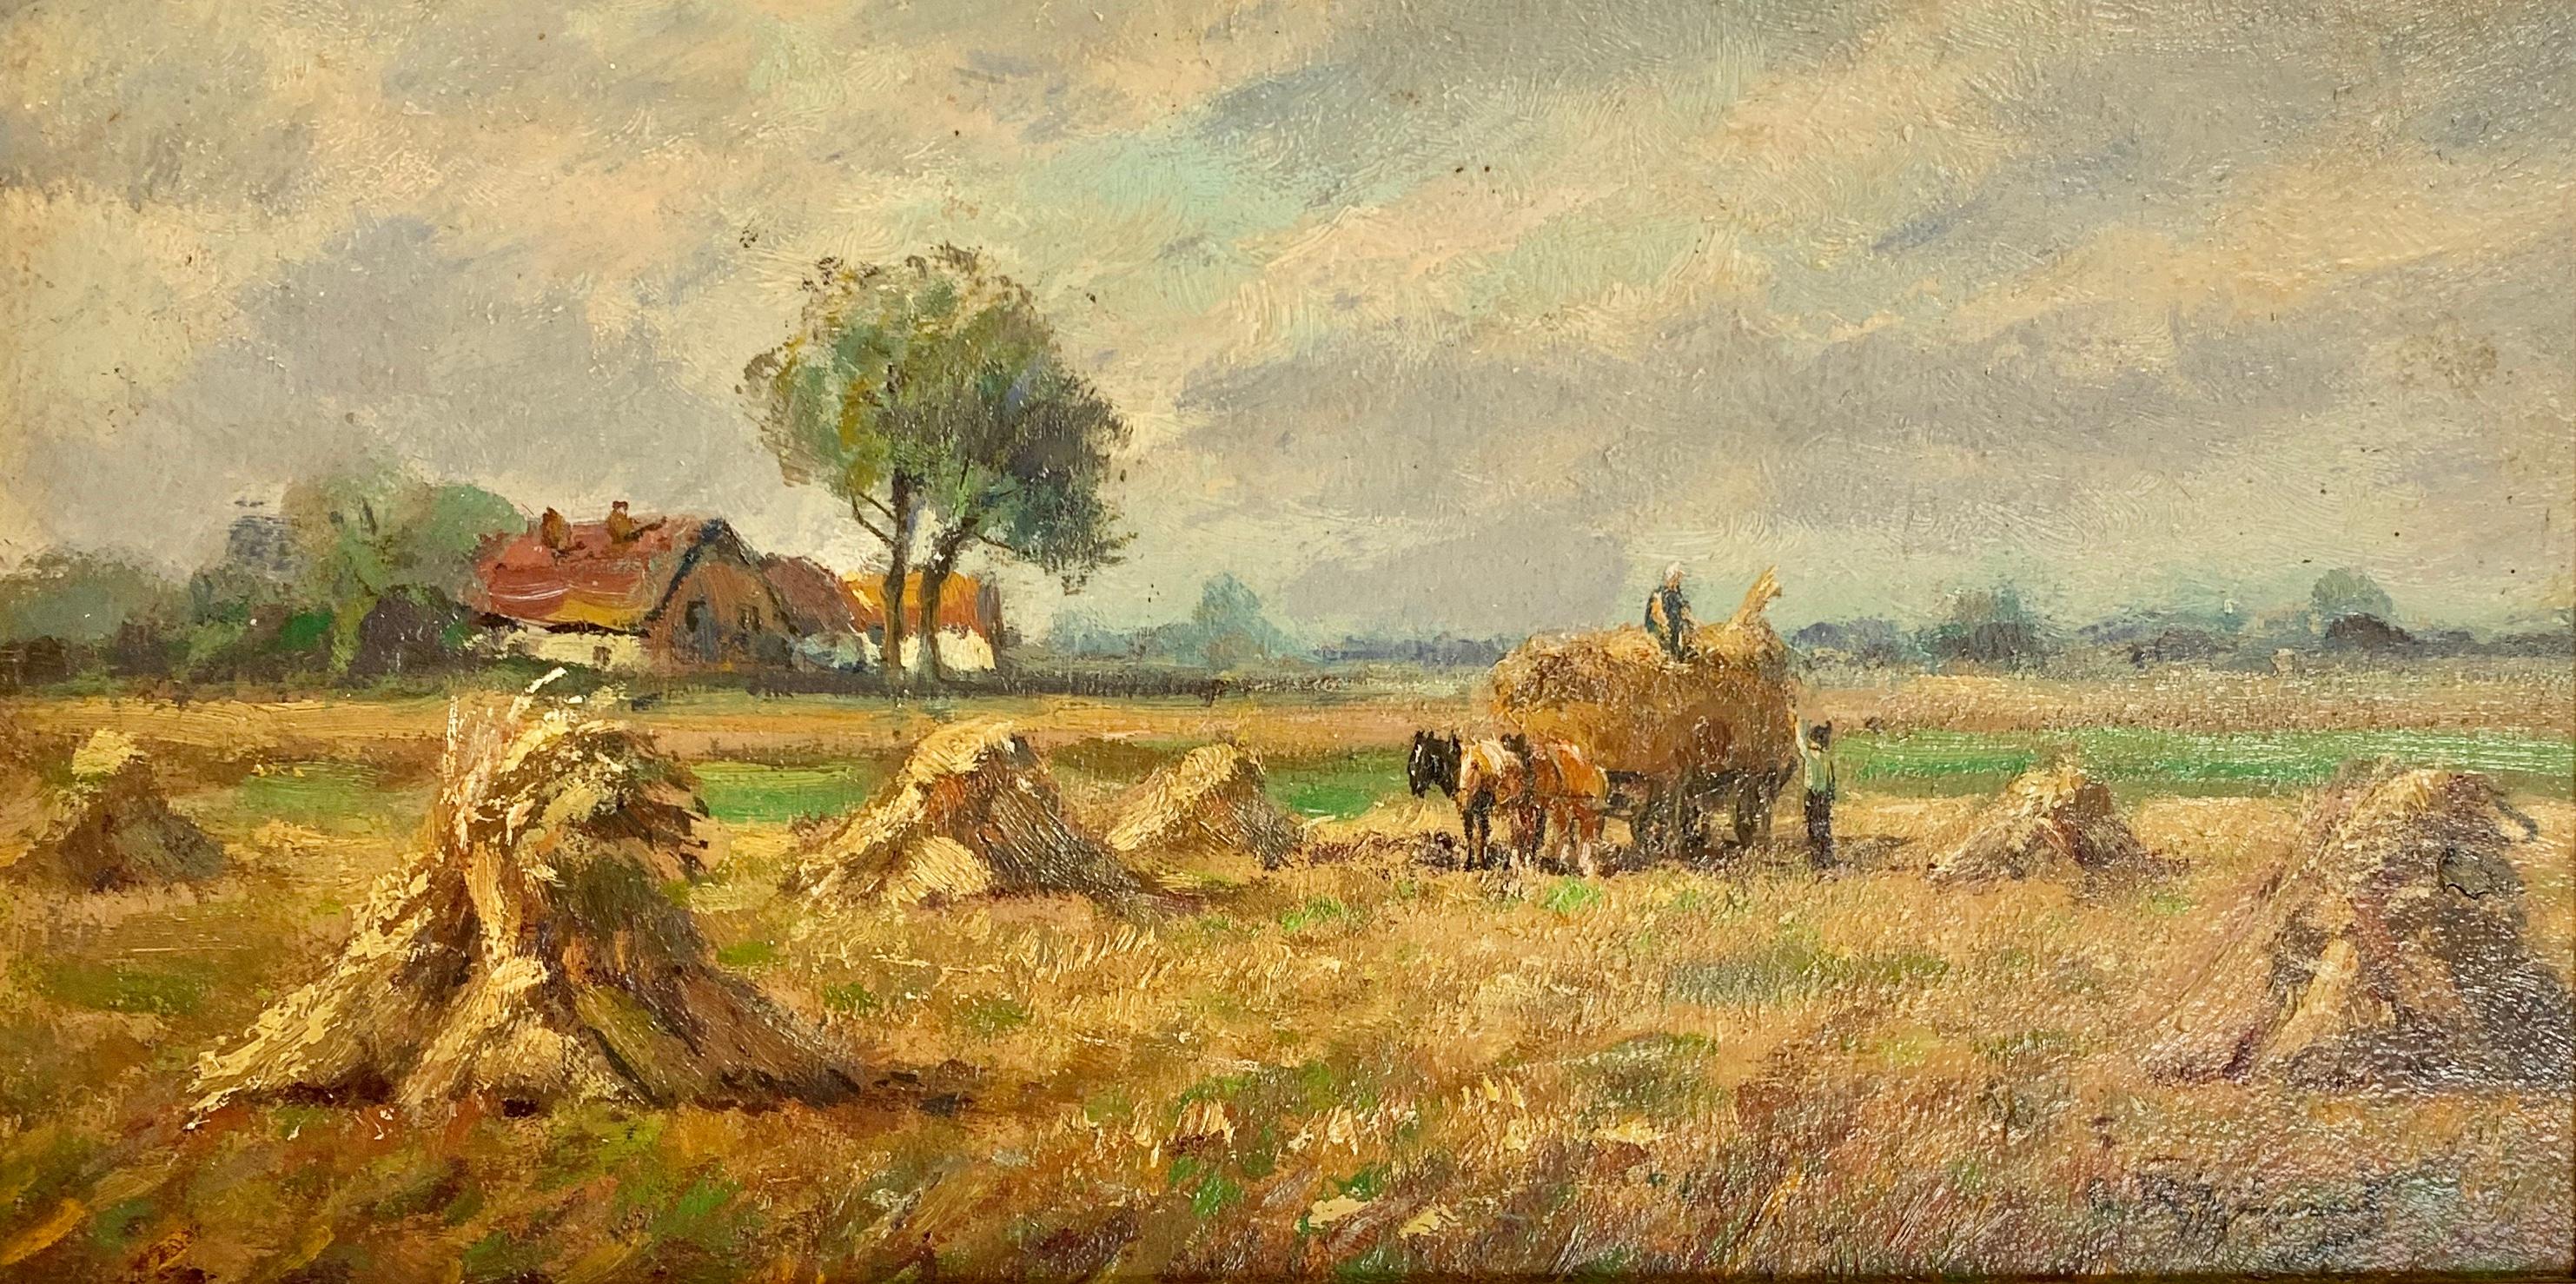 The Harvest, Impressionist Haystack 19th Century - Painting by G. Rhumont